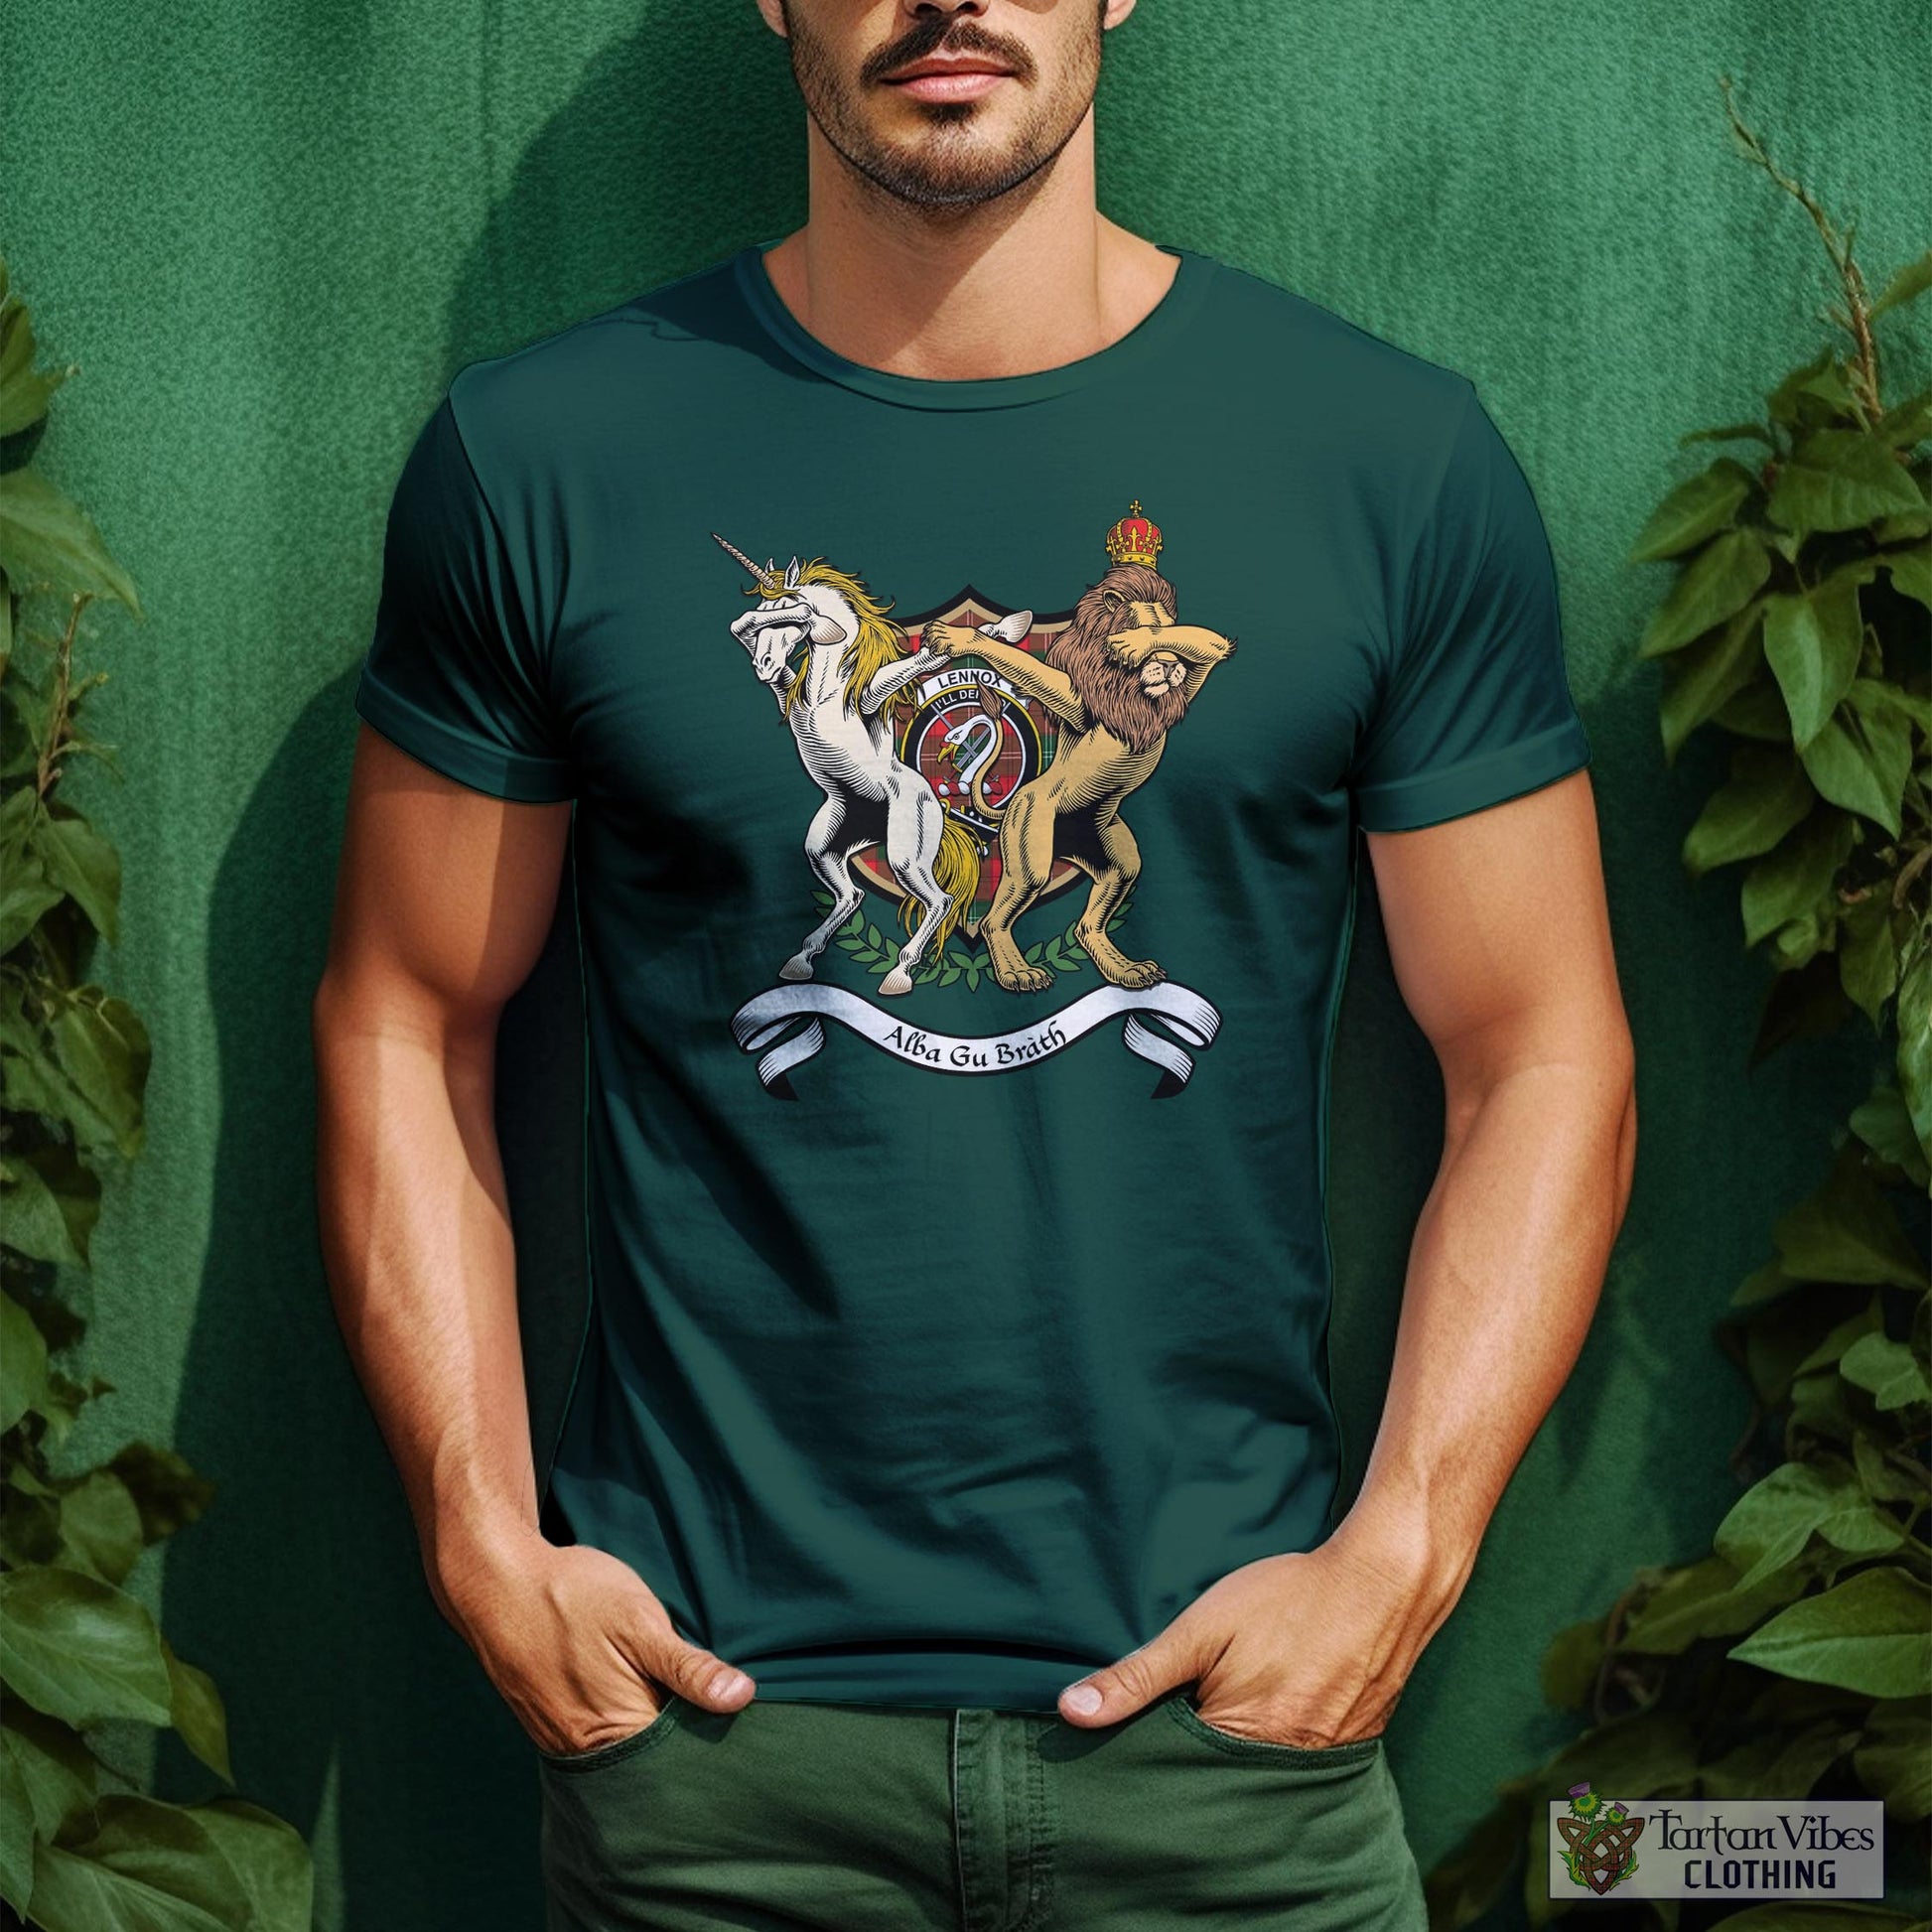 Tartan Vibes Clothing Lennox Modern Family Crest Cotton Men's T-Shirt with Scotland Royal Coat Of Arm Funny Style